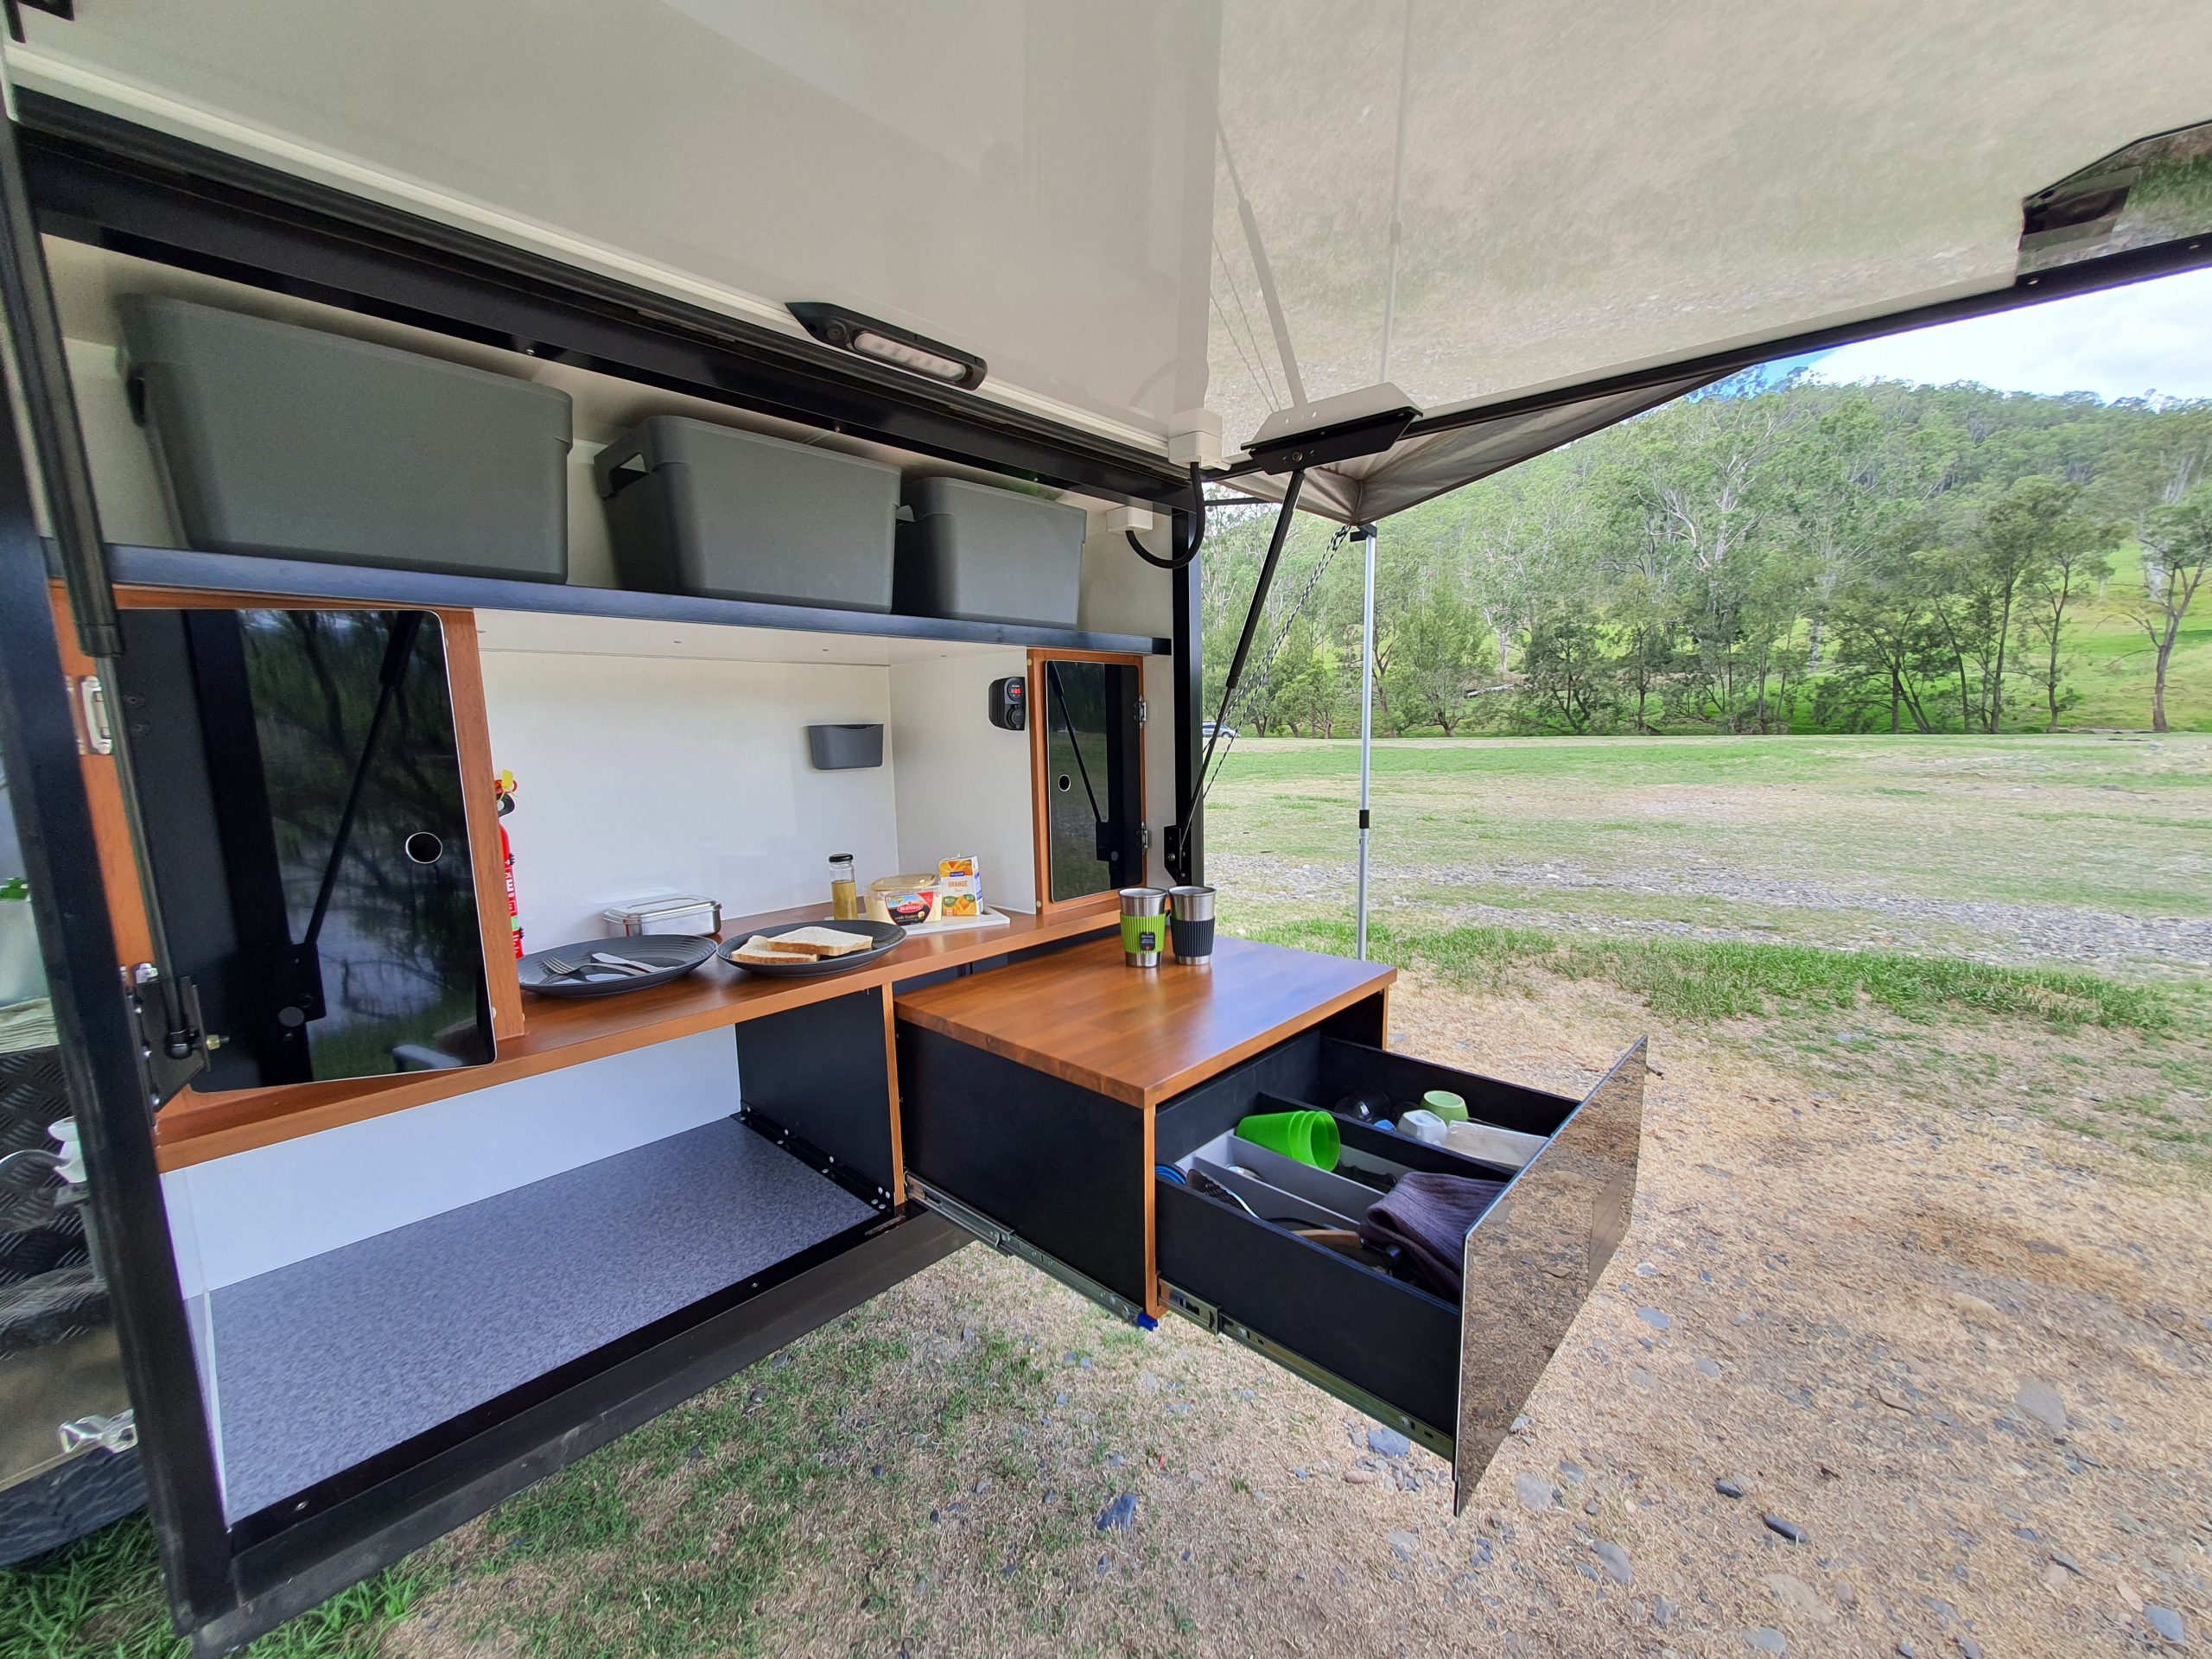 Check out the amount of storage in the Origin Campers Long-Range camper trailer . With abundant storage, easy access open shelving and large deep cupboards to store all your camping goodies.